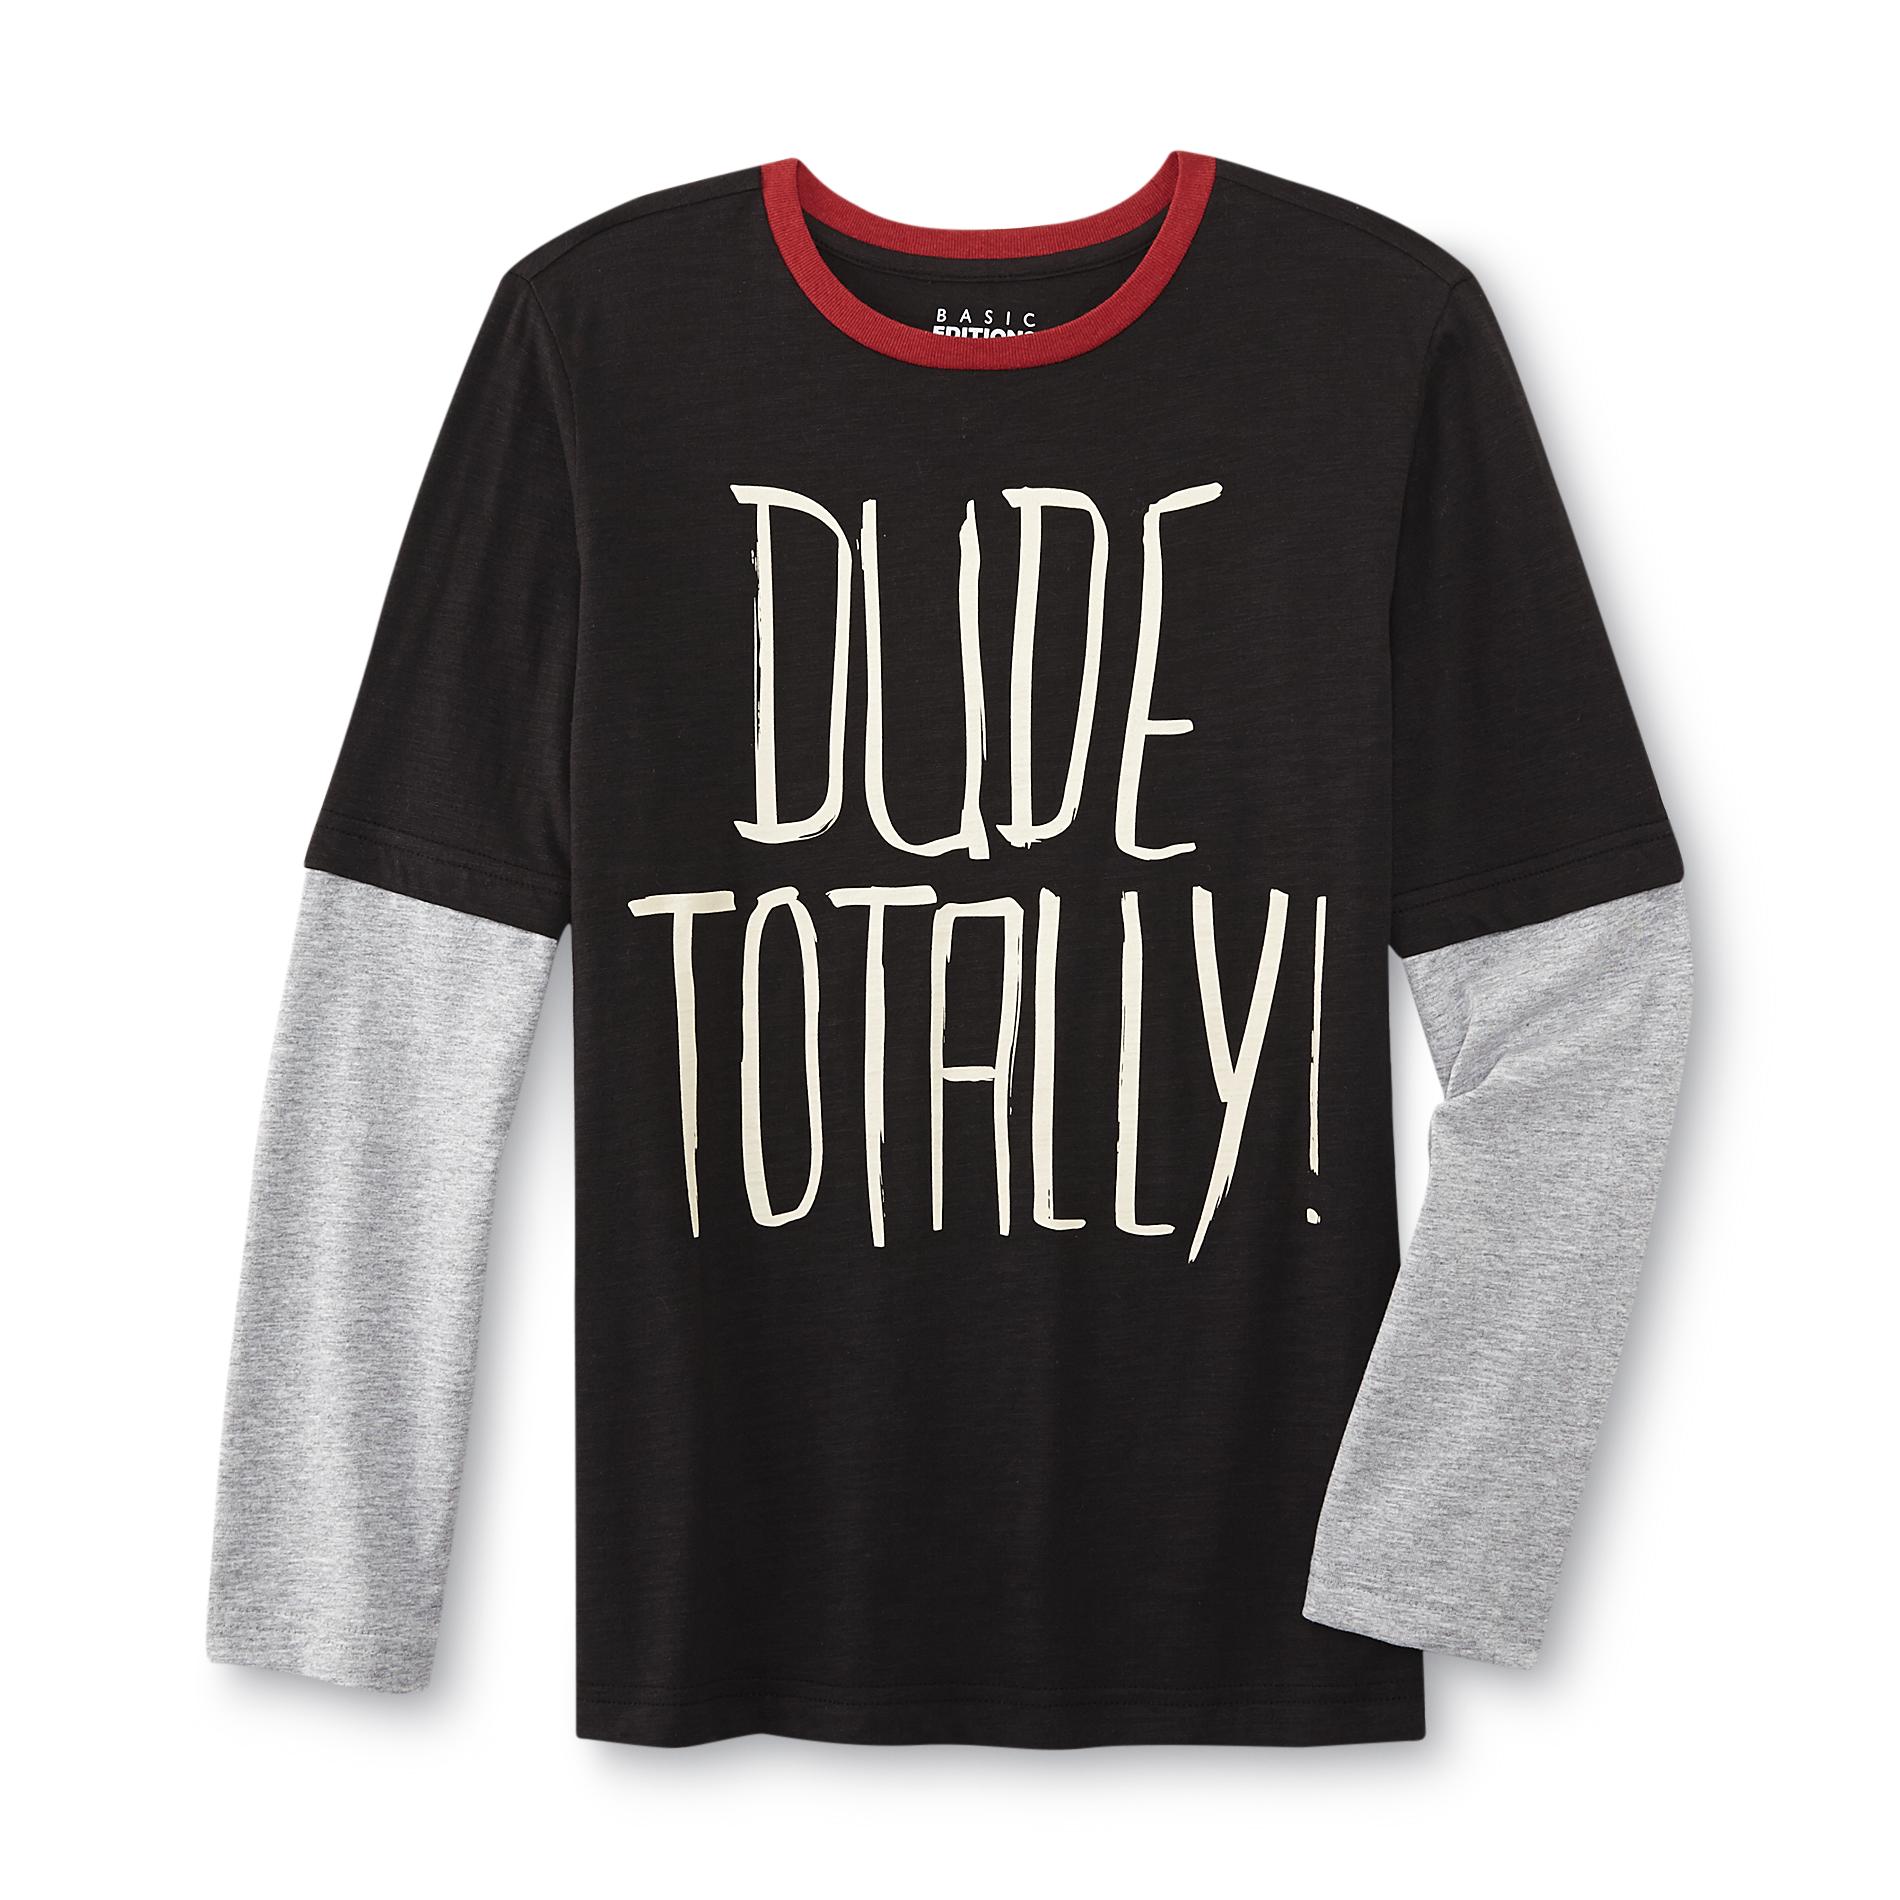 Basic Editions Boy's Graphic T-Shirt - Dude Totally